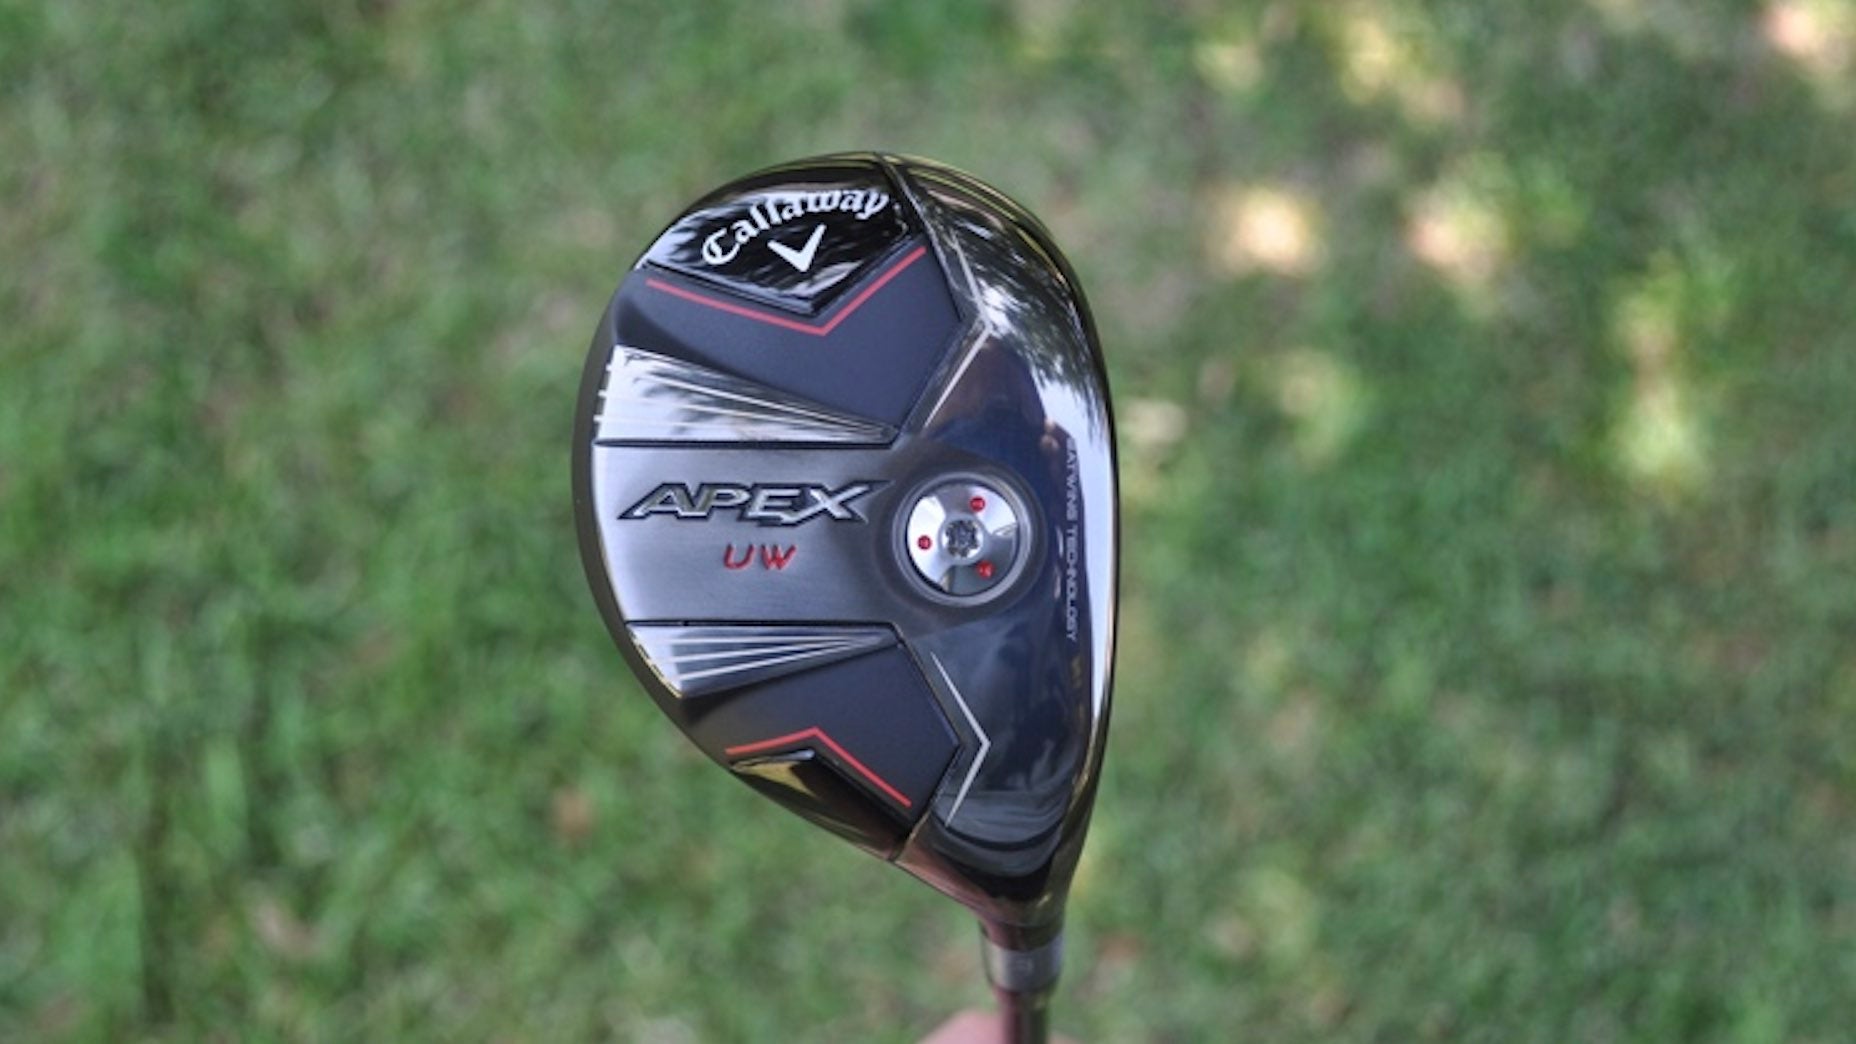 Callaway Introduces Upgraded Apex UW Utility Wood for Enhanced Performance